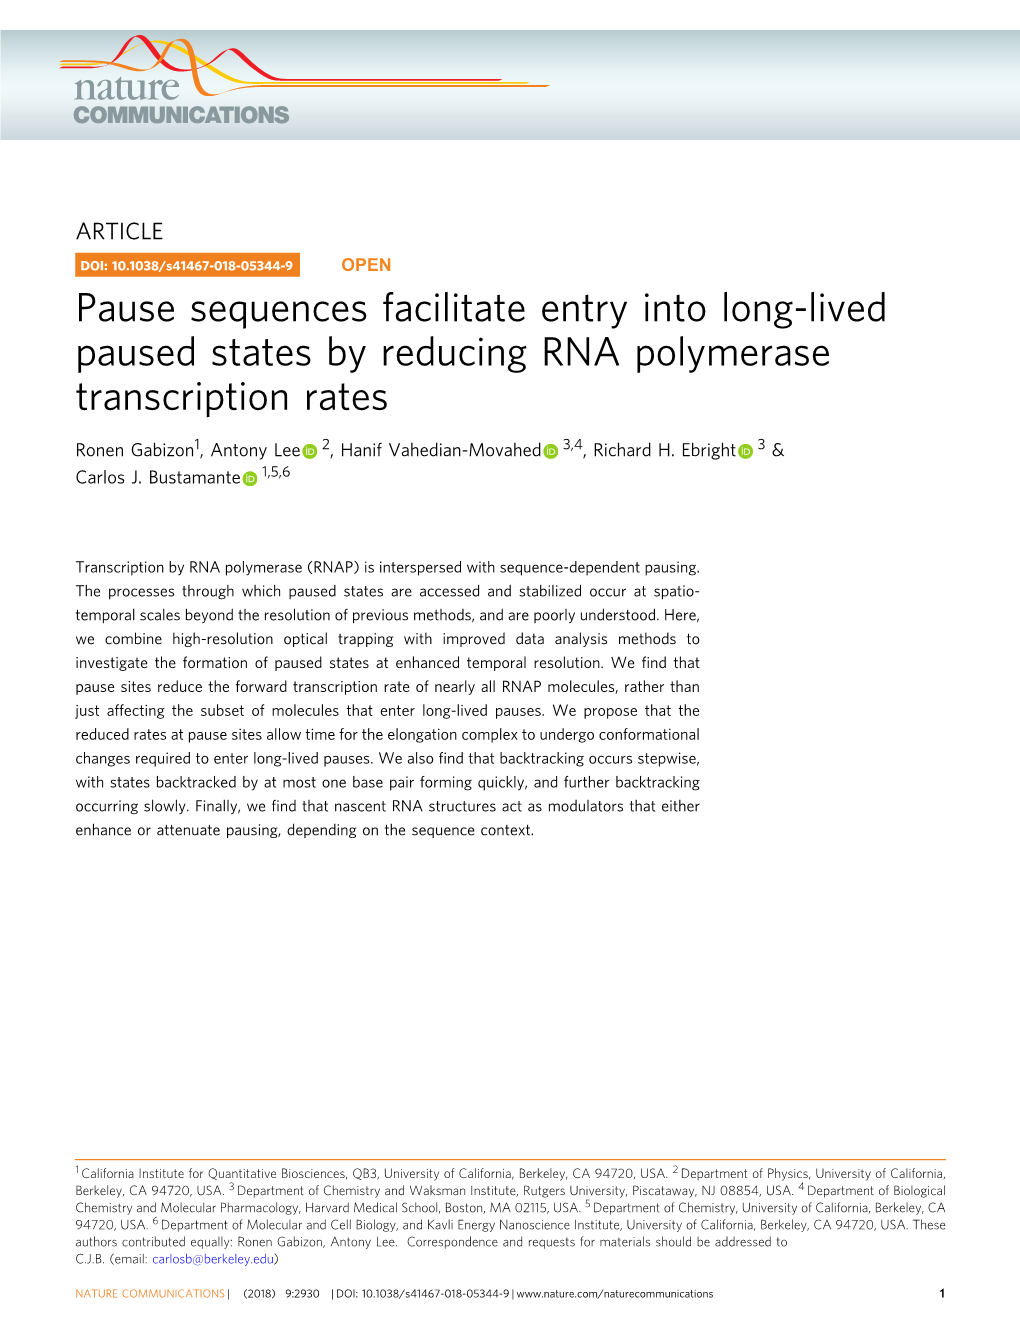 Pause Sequences Facilitate Entry Into Long-Lived Paused States by Reducing RNA Polymerase Transcription Rates